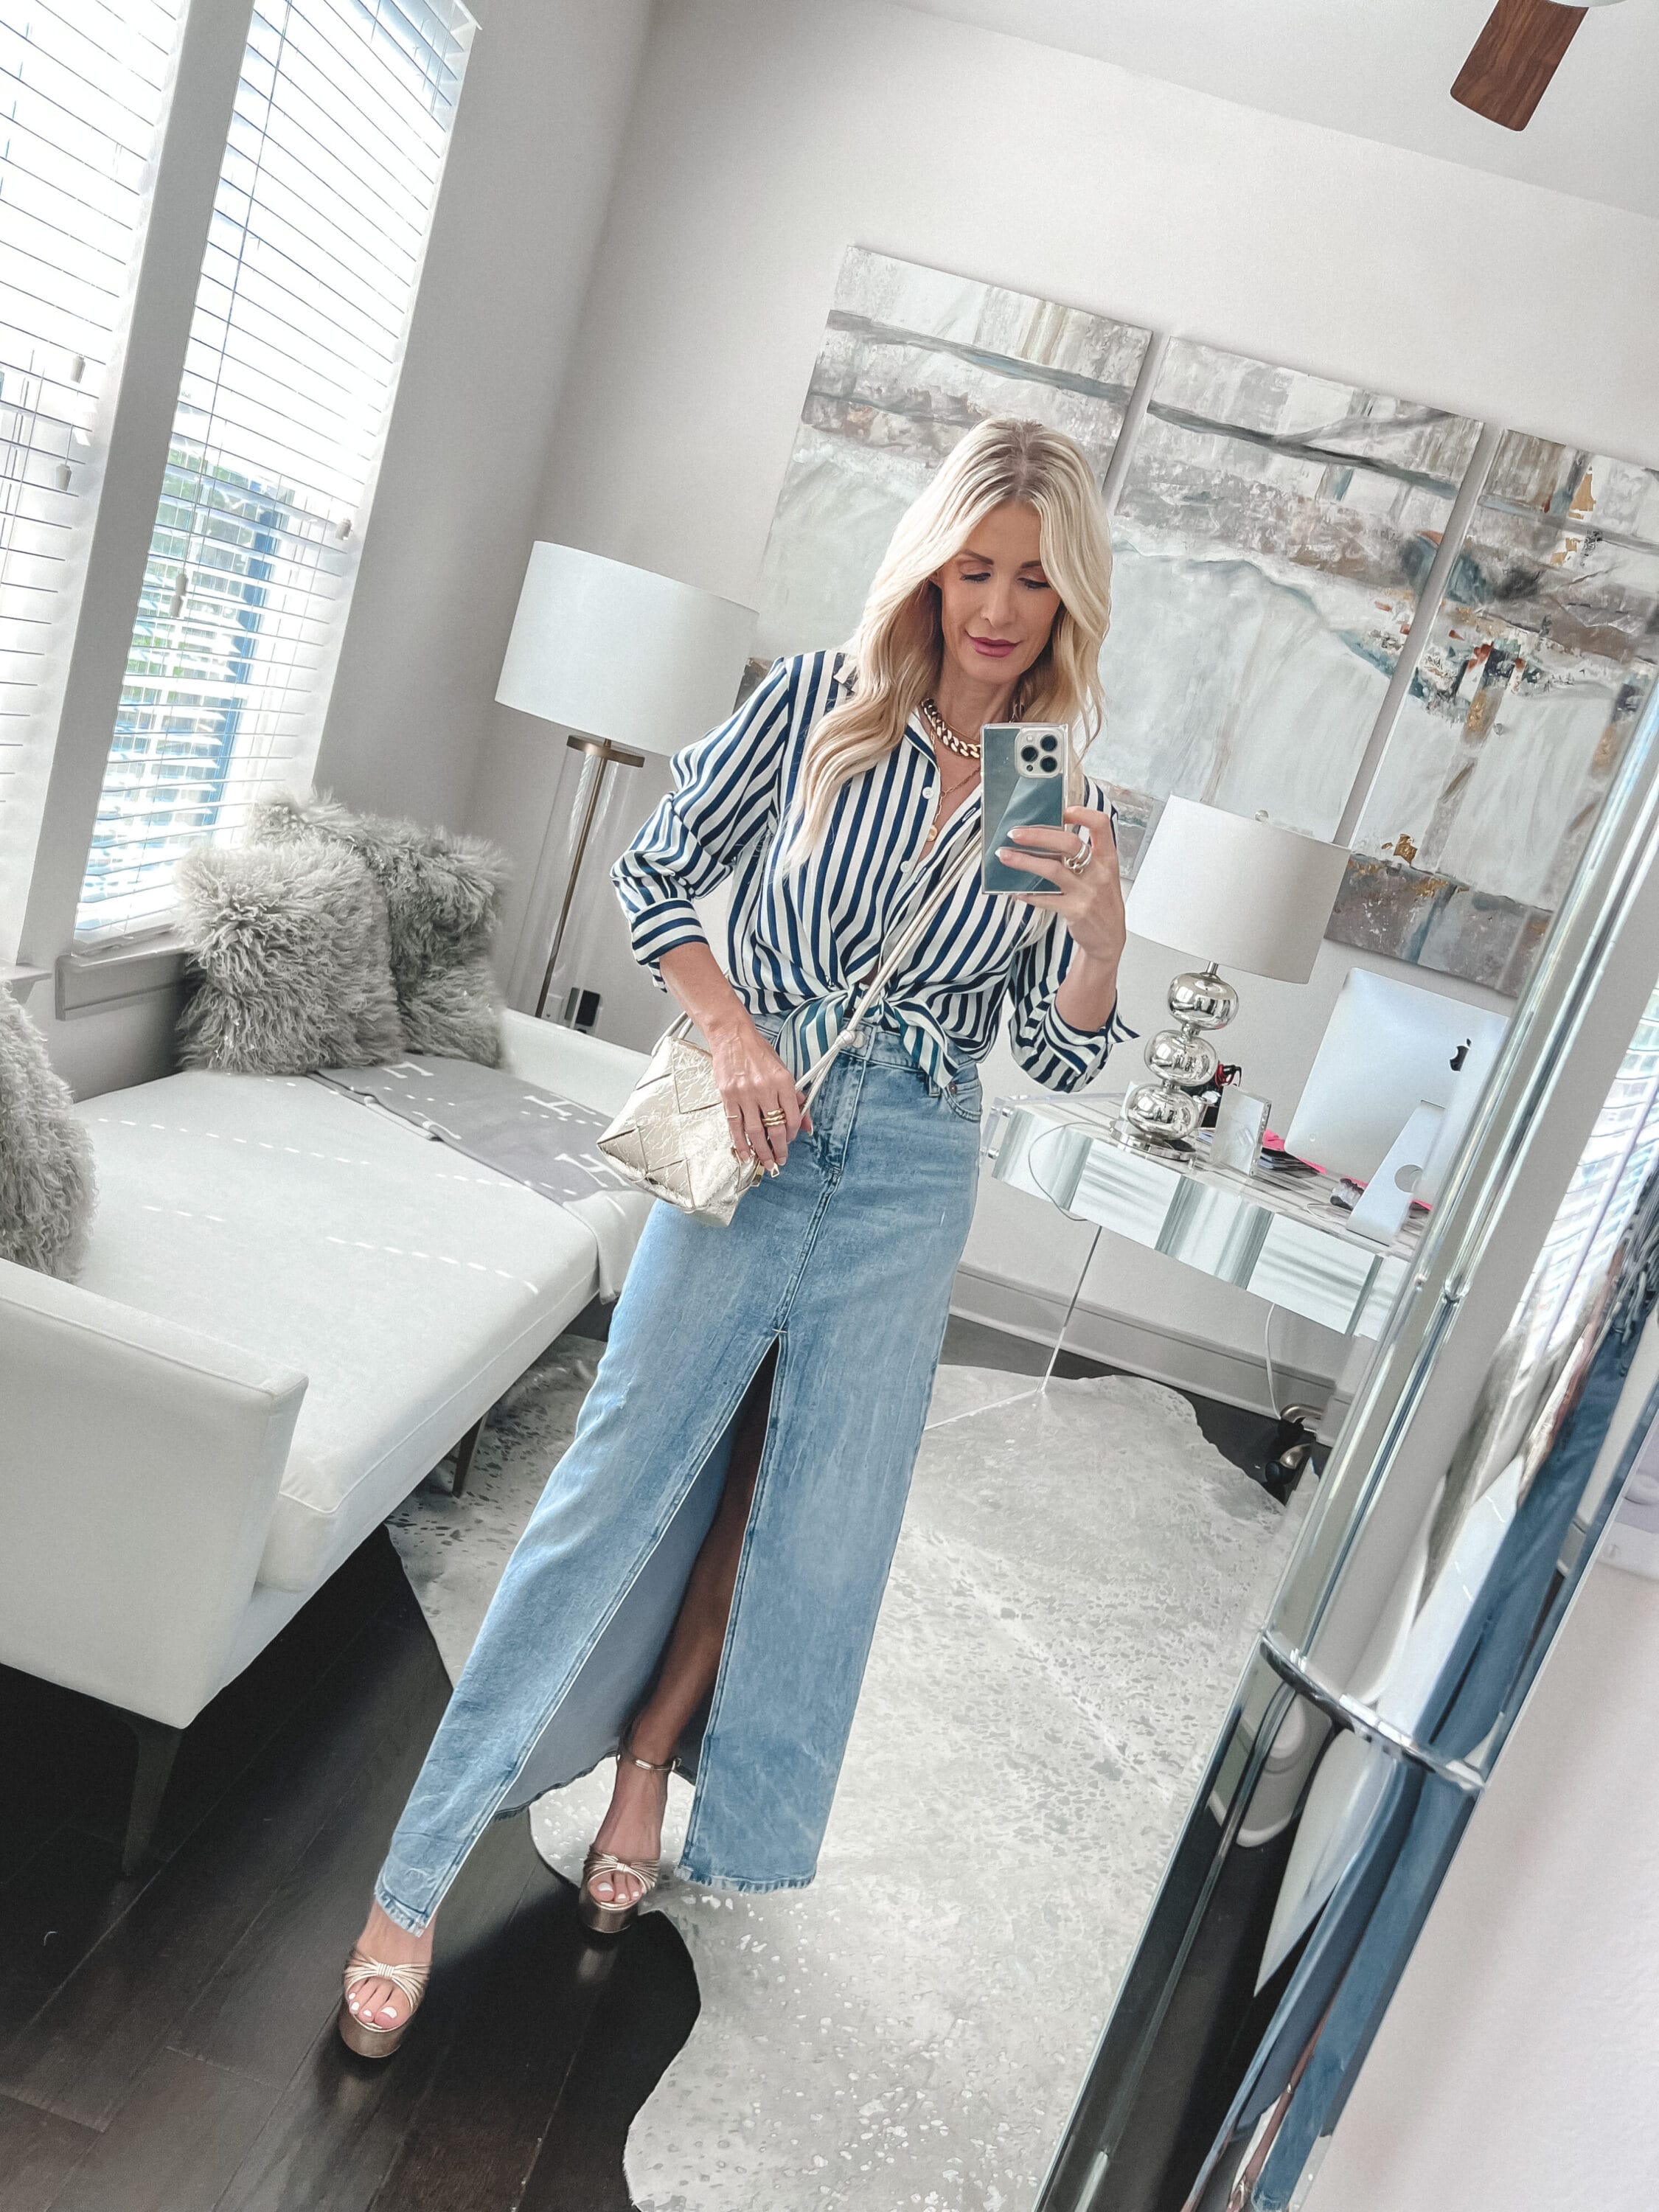 Over 40 fashion influencer showing how to style denim midi skirt with a classic button-down shirt.